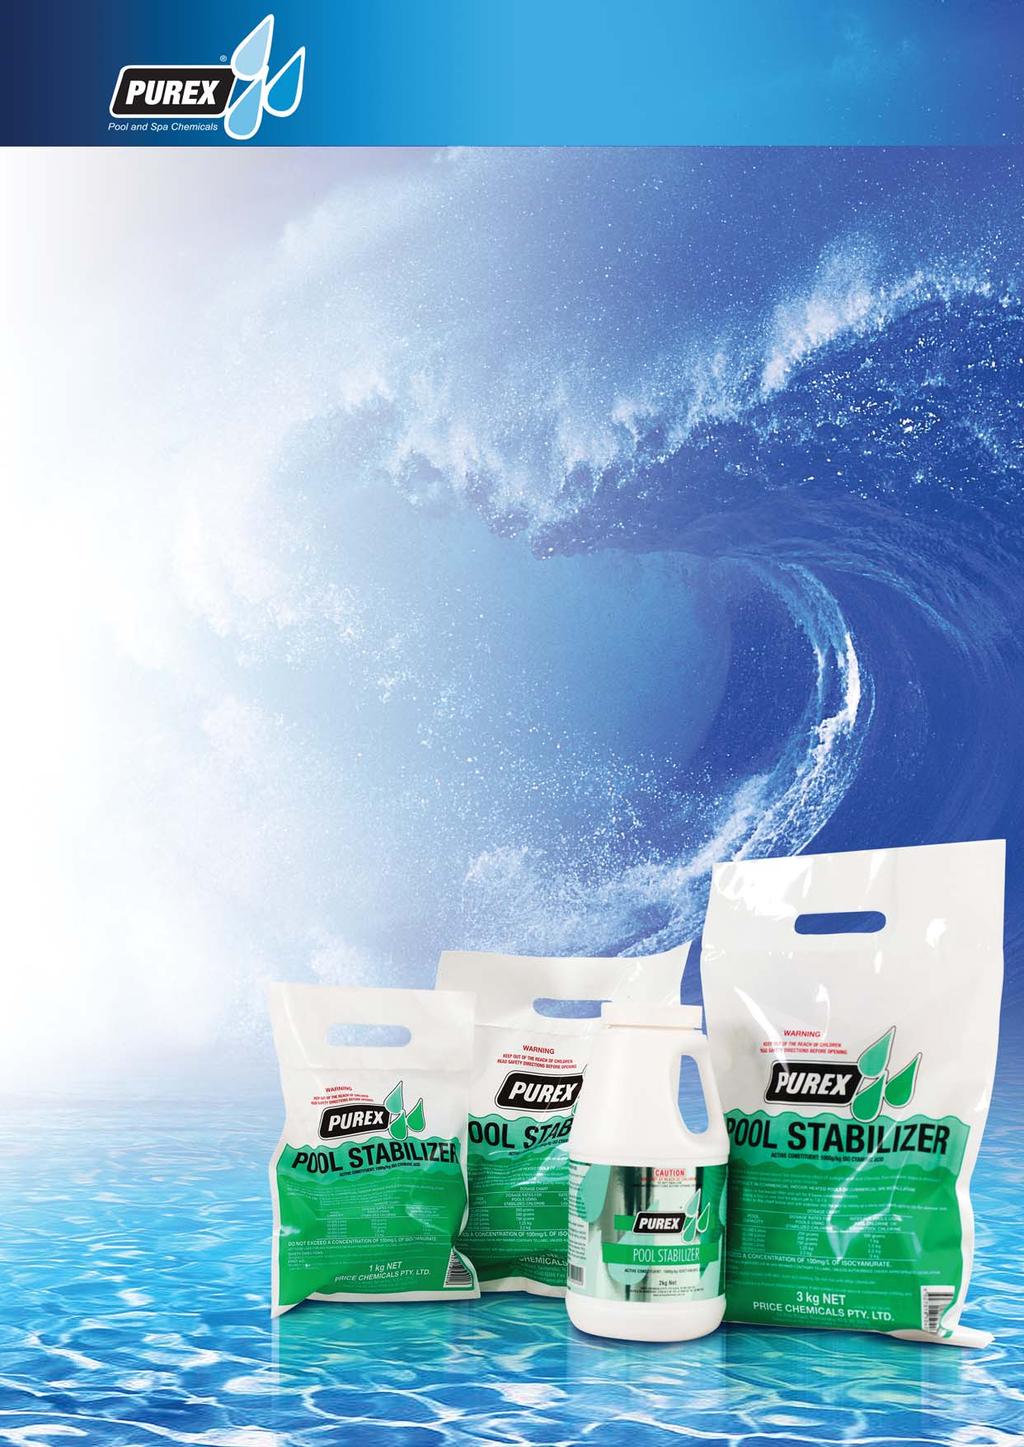 PUREX STABILIZER Isocyanuric Acid To protect chlorine from UV rays During the hot weather periods Service pool. Remove auto pool cleaner.